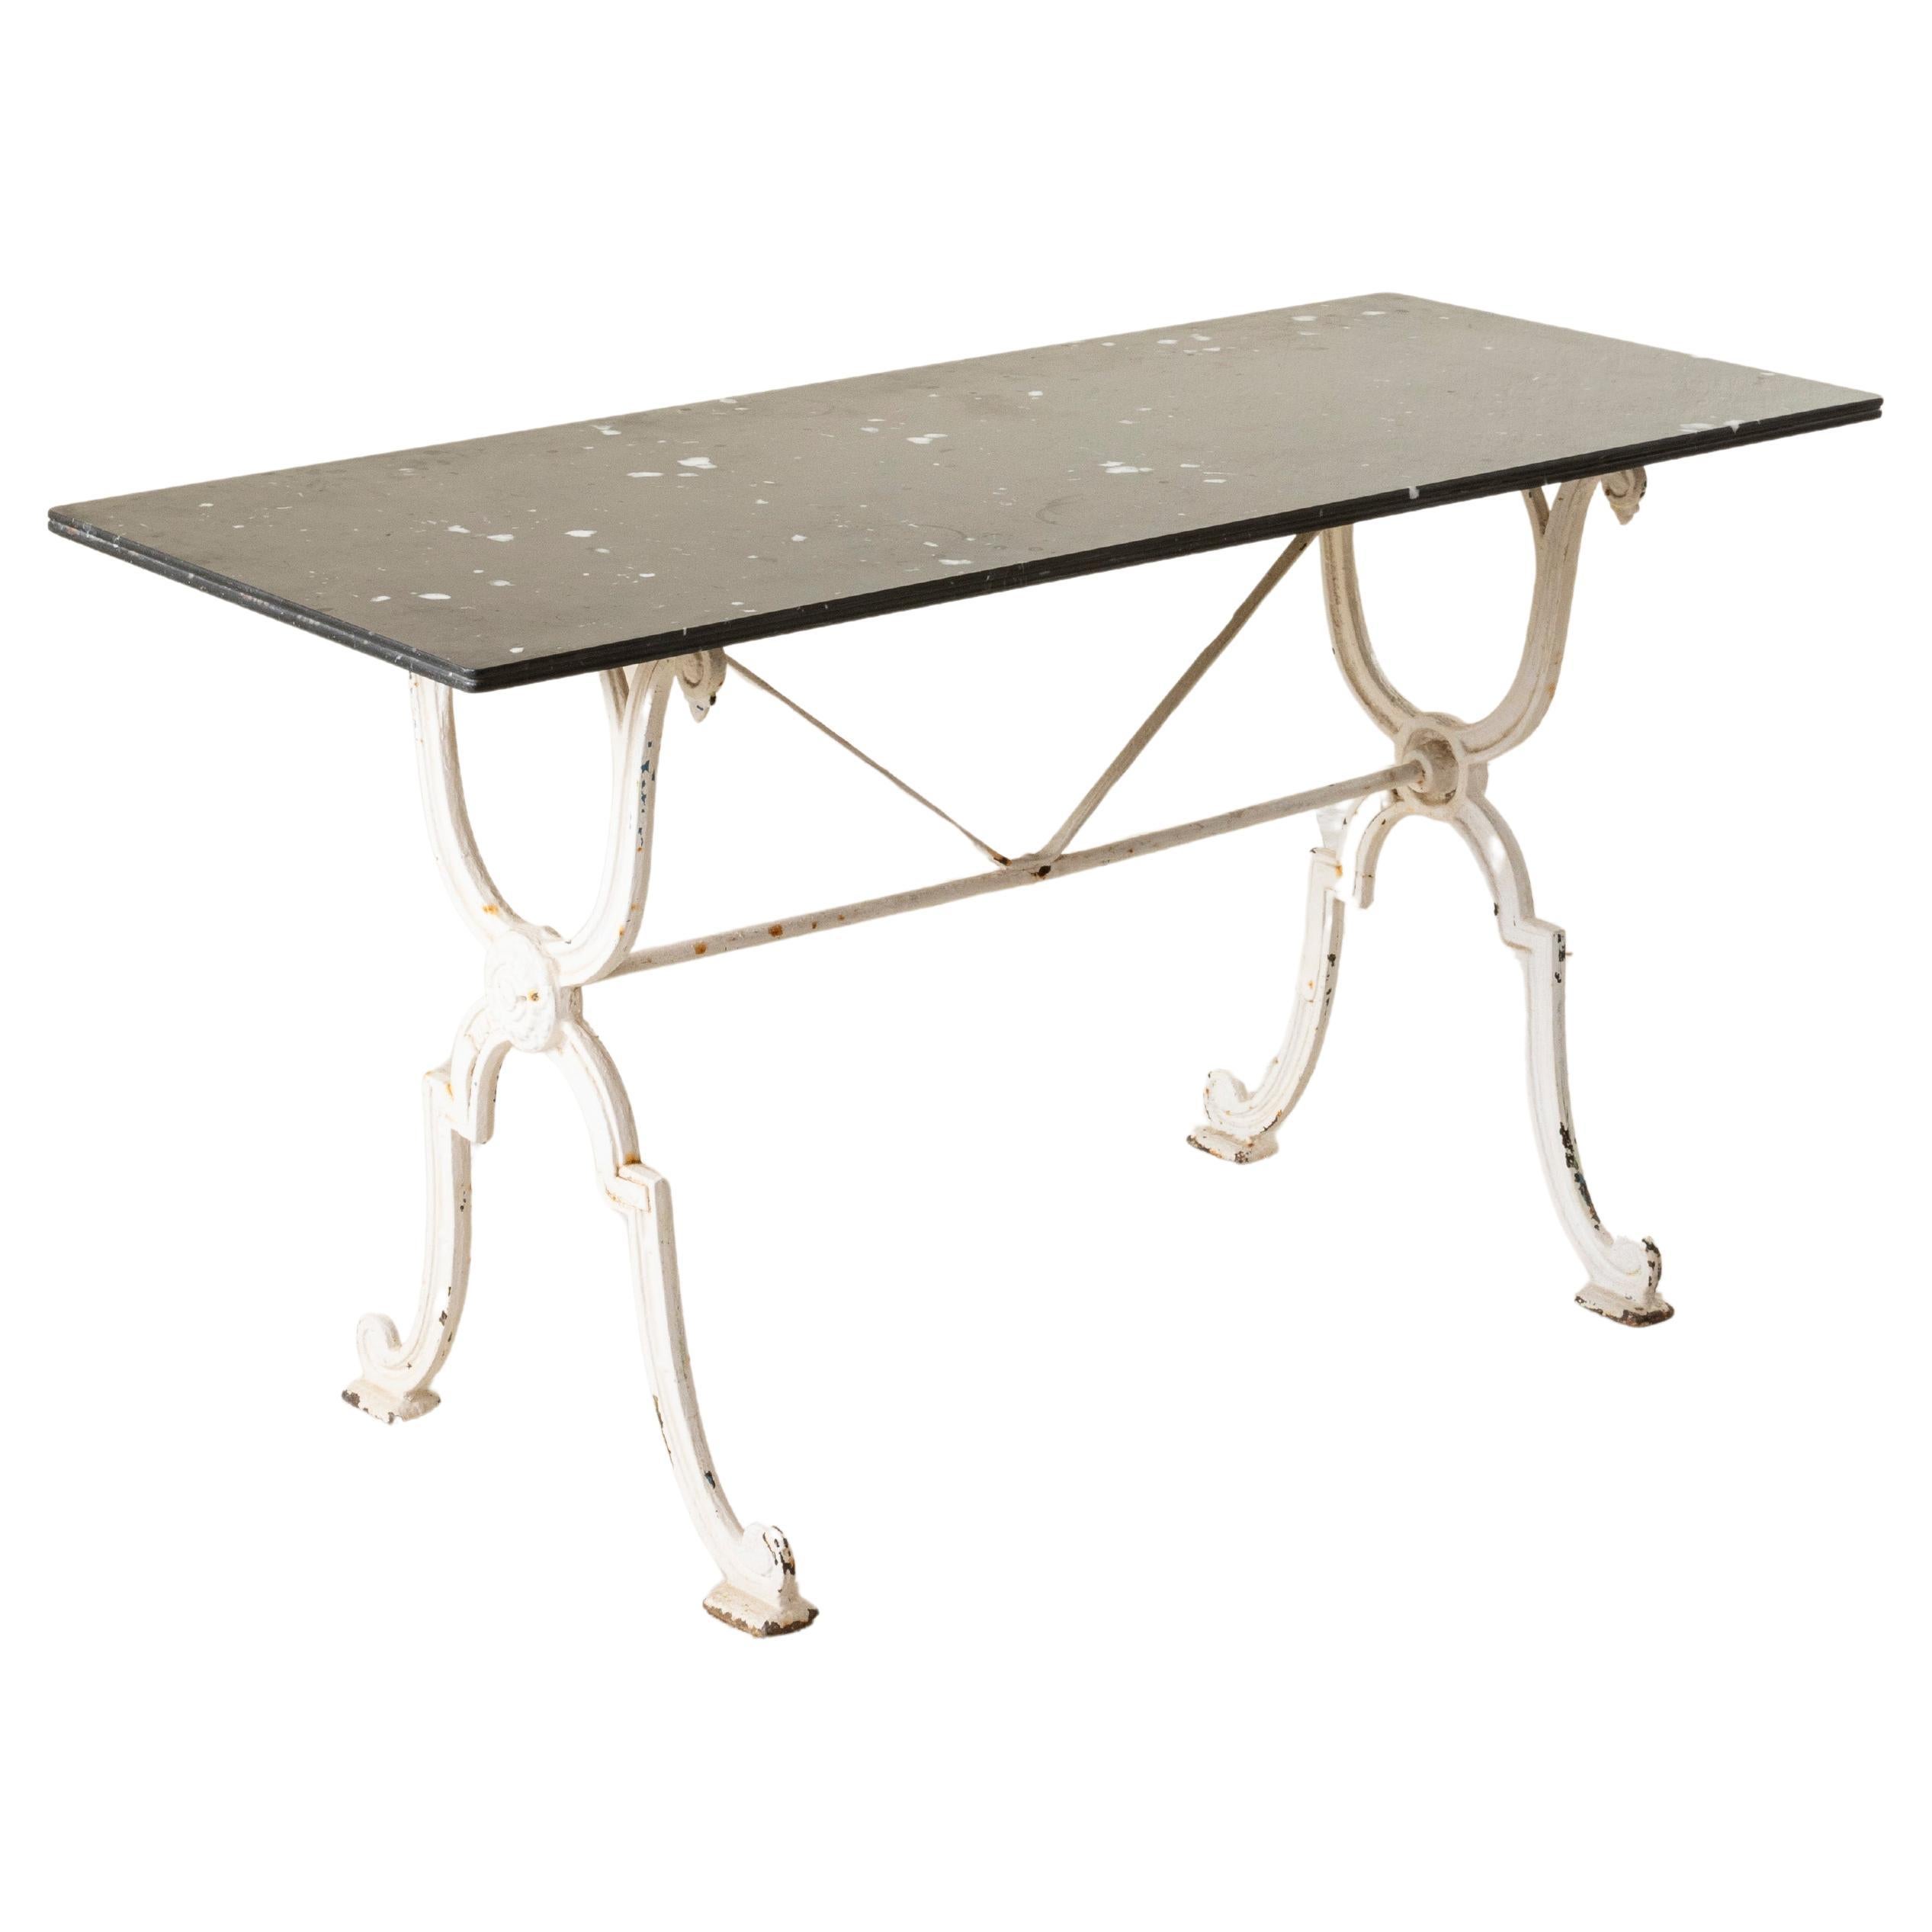 Early 20th Century French Iron Bistro Table with Black Marble Top, 53-in Long For Sale